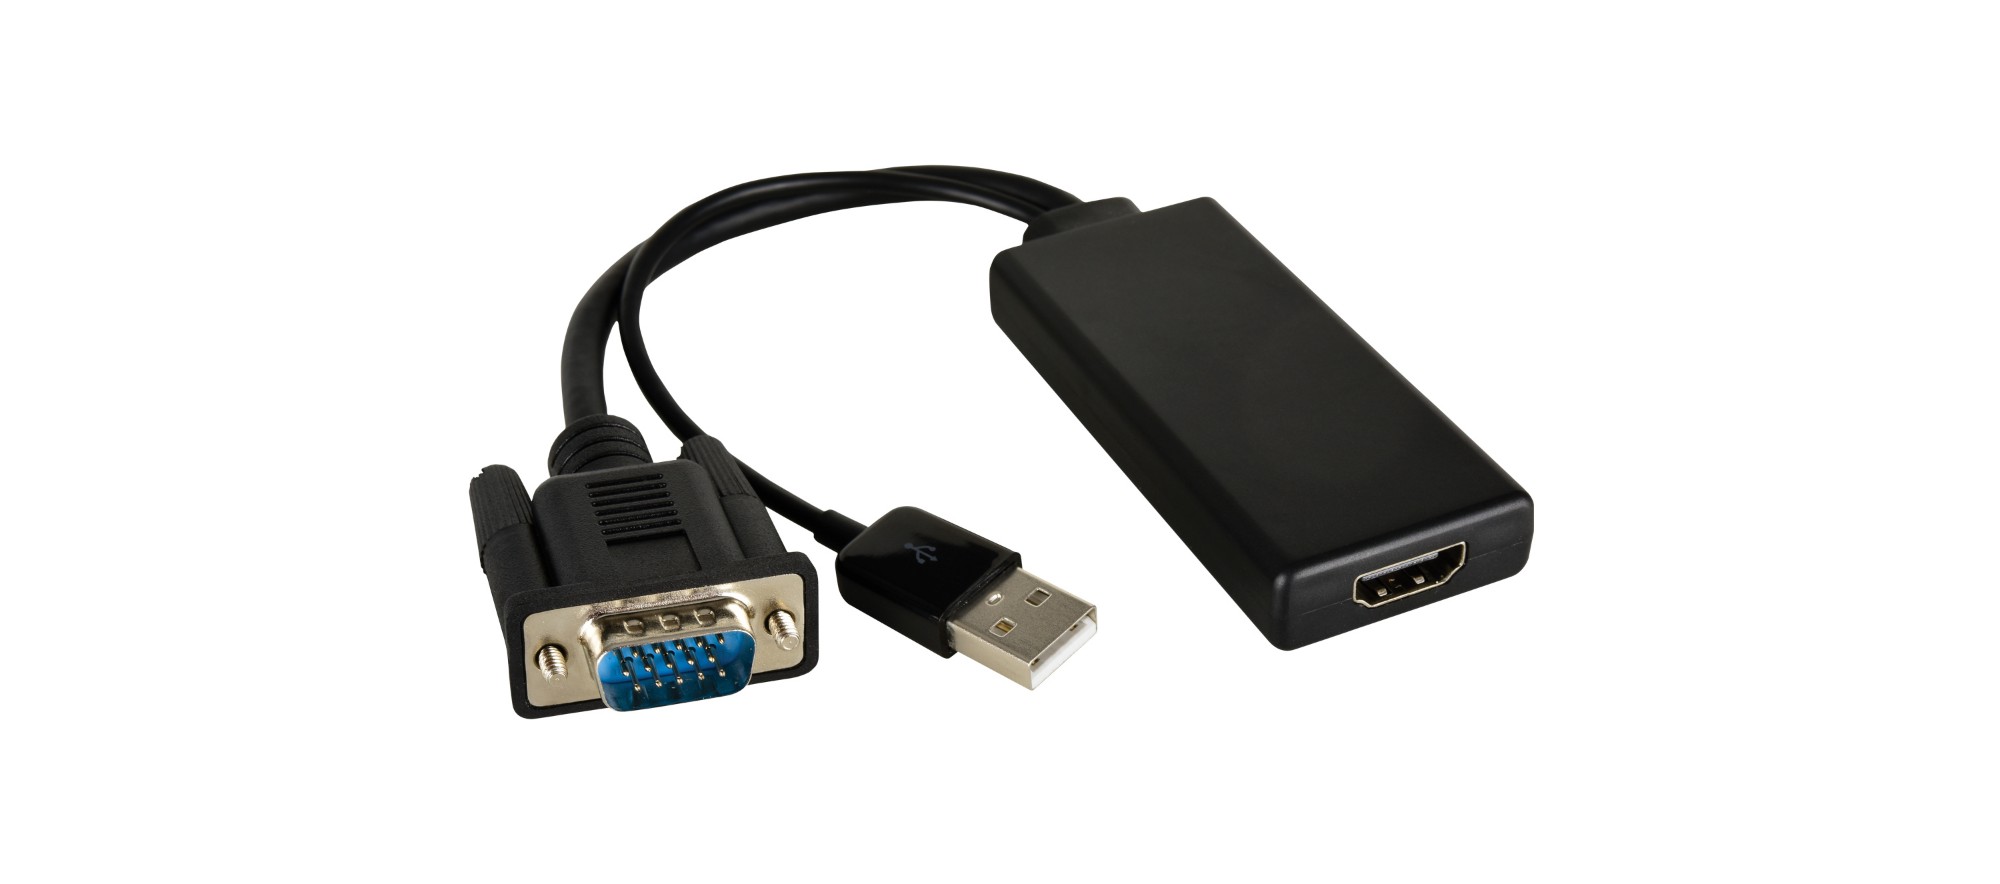 ADC-GM/HF KRAMER ELECTRONICS 15-pin HD (M) to HDMI (F)  with USB Audio/Power Adapter Cable (ADC-GM/HF)